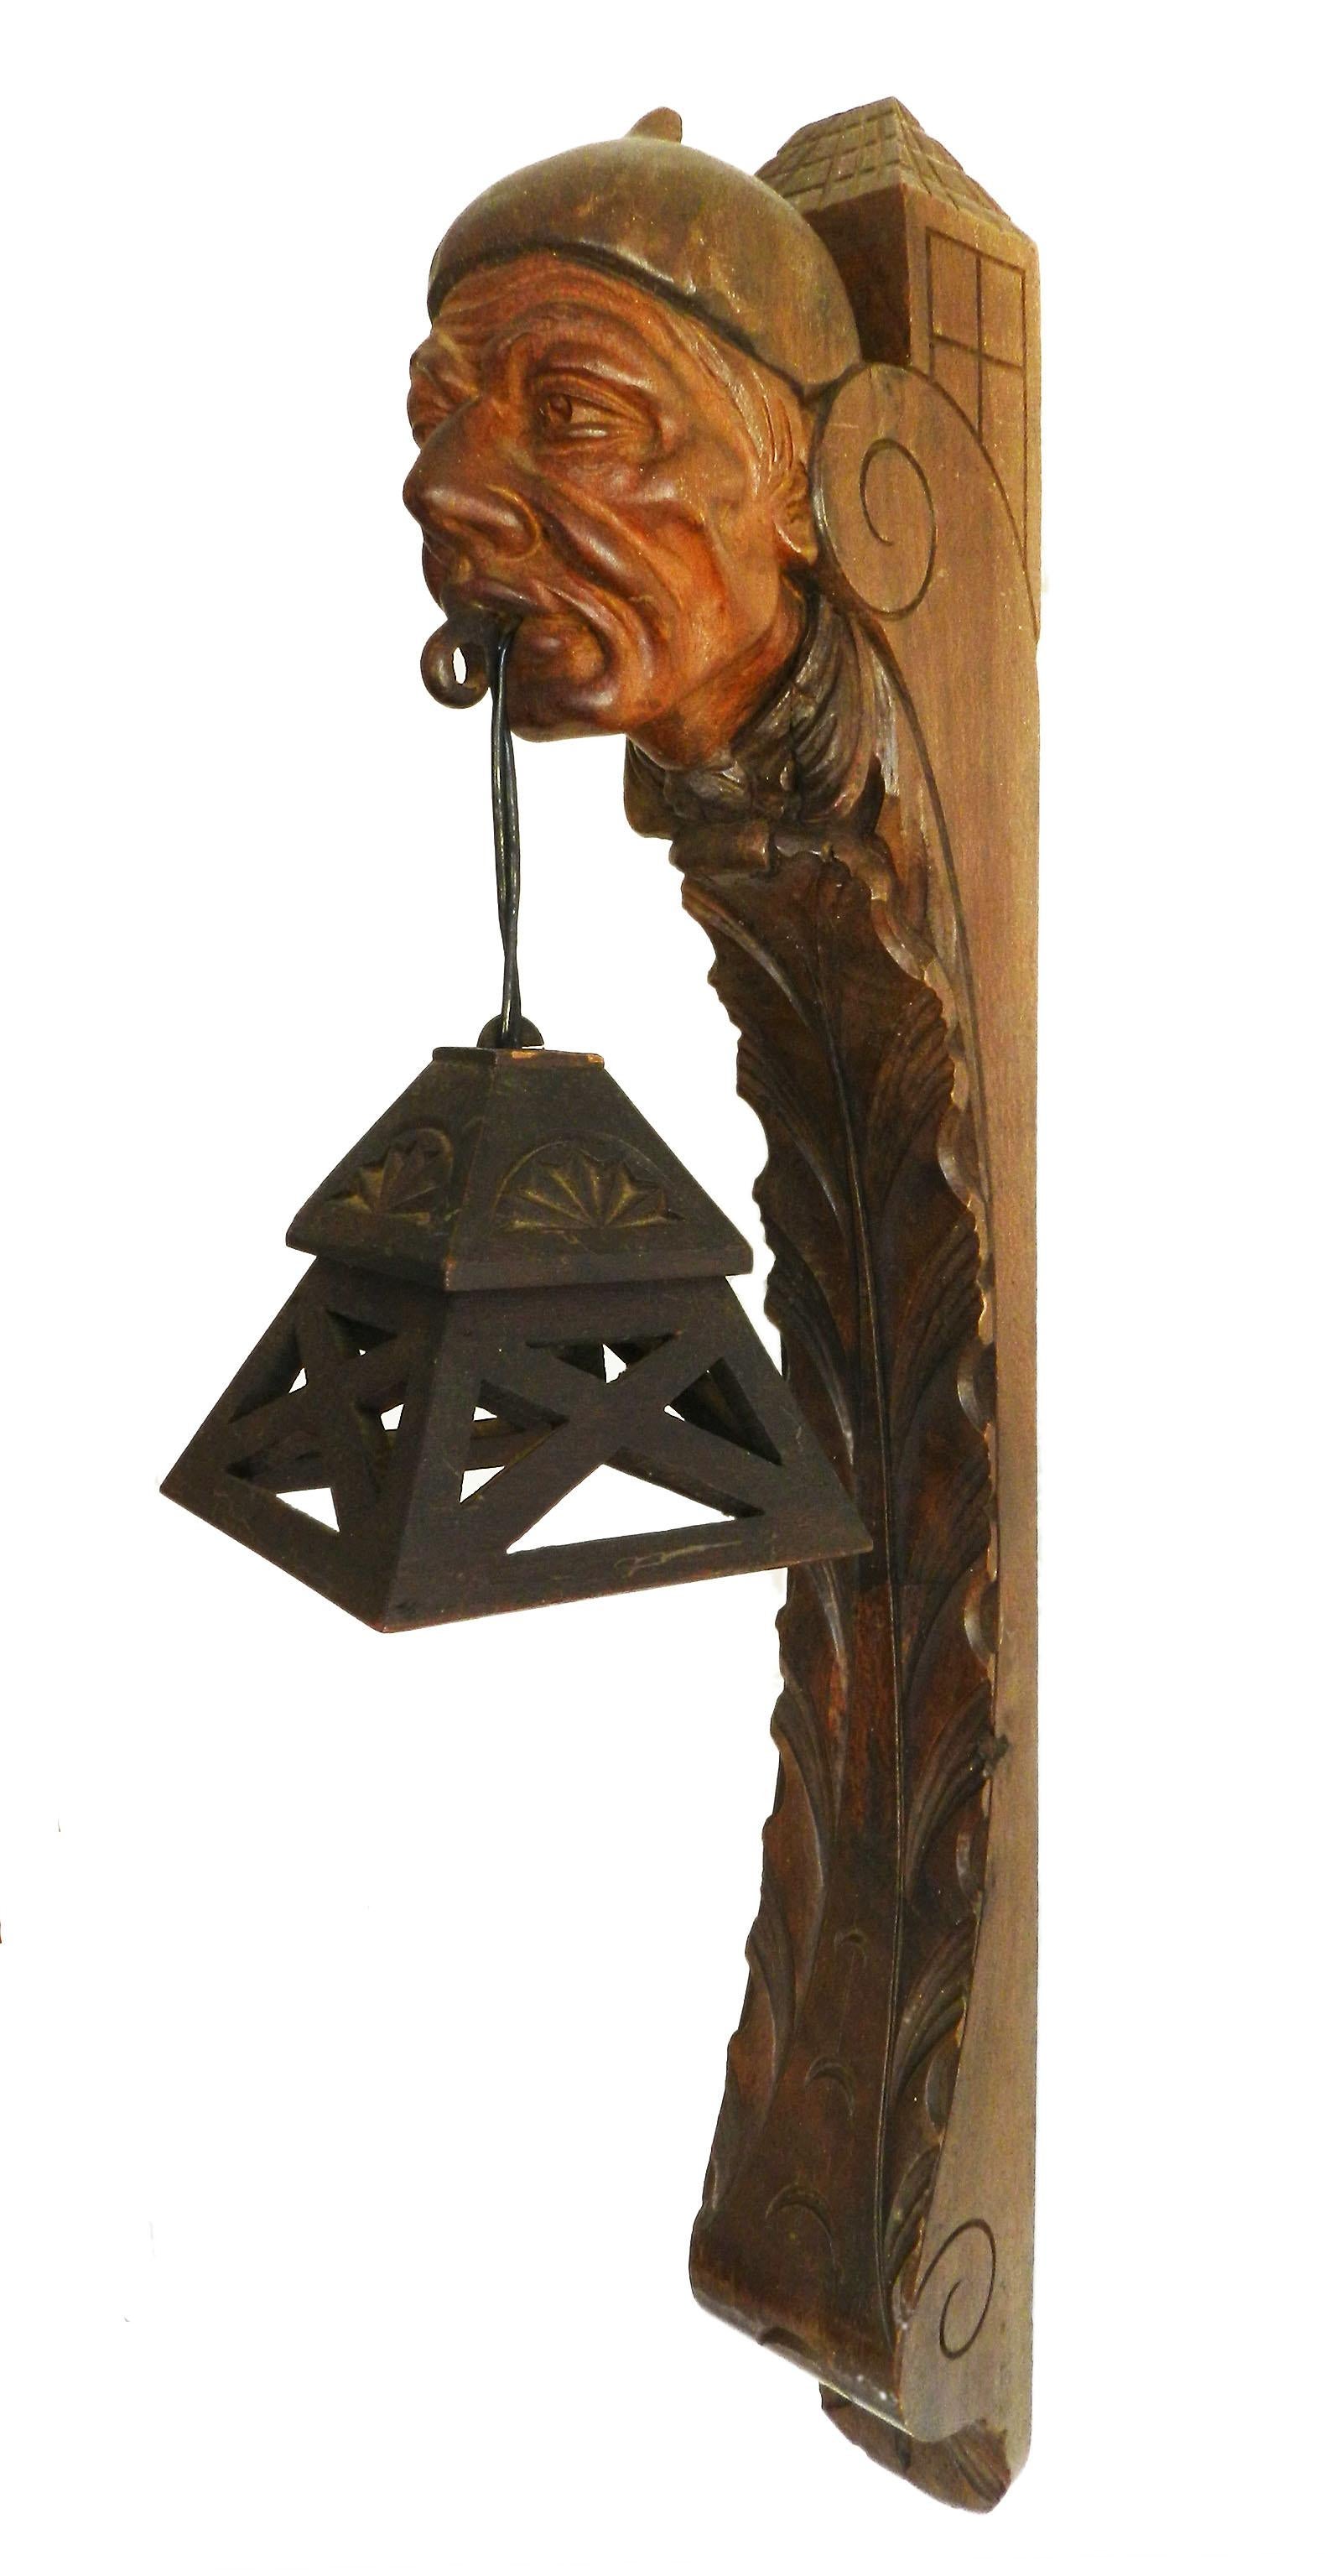 Carved Wall Sconce Lantern Light French Basque Sculpted Wood Head, c1920 FREE SHIPPING